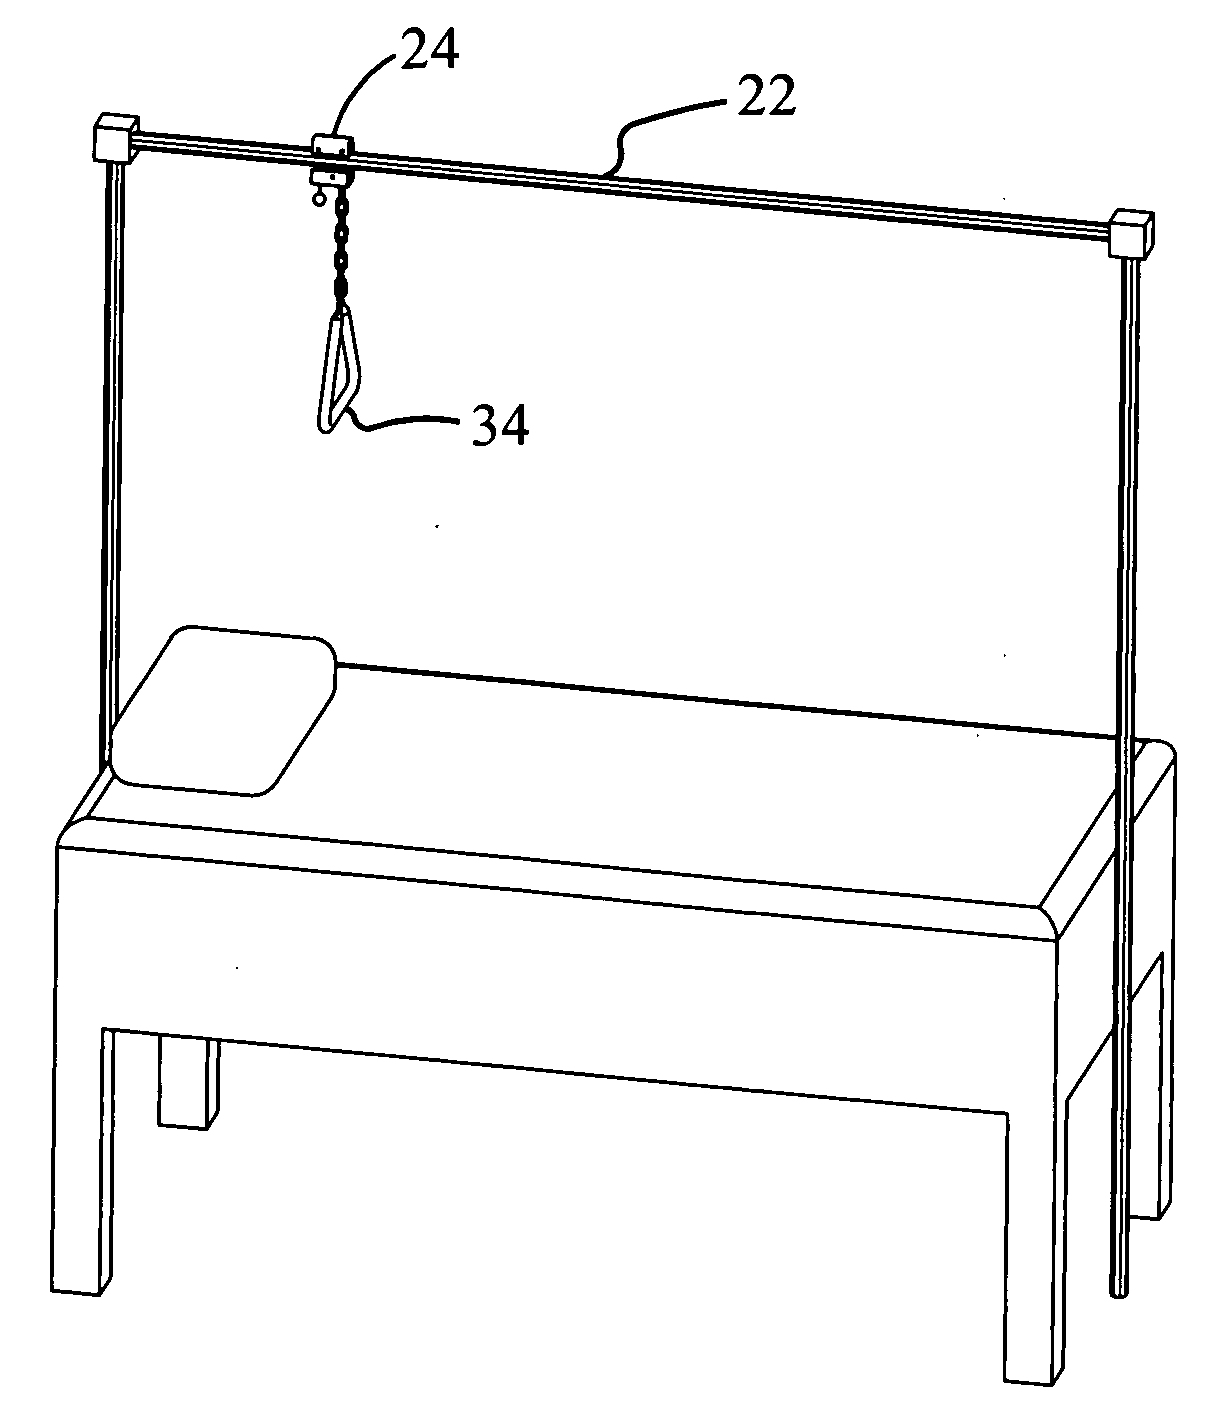 Method and apparatus for use by a patient in temporarily lifting that person with respect to a horizontal surface--such as a bed